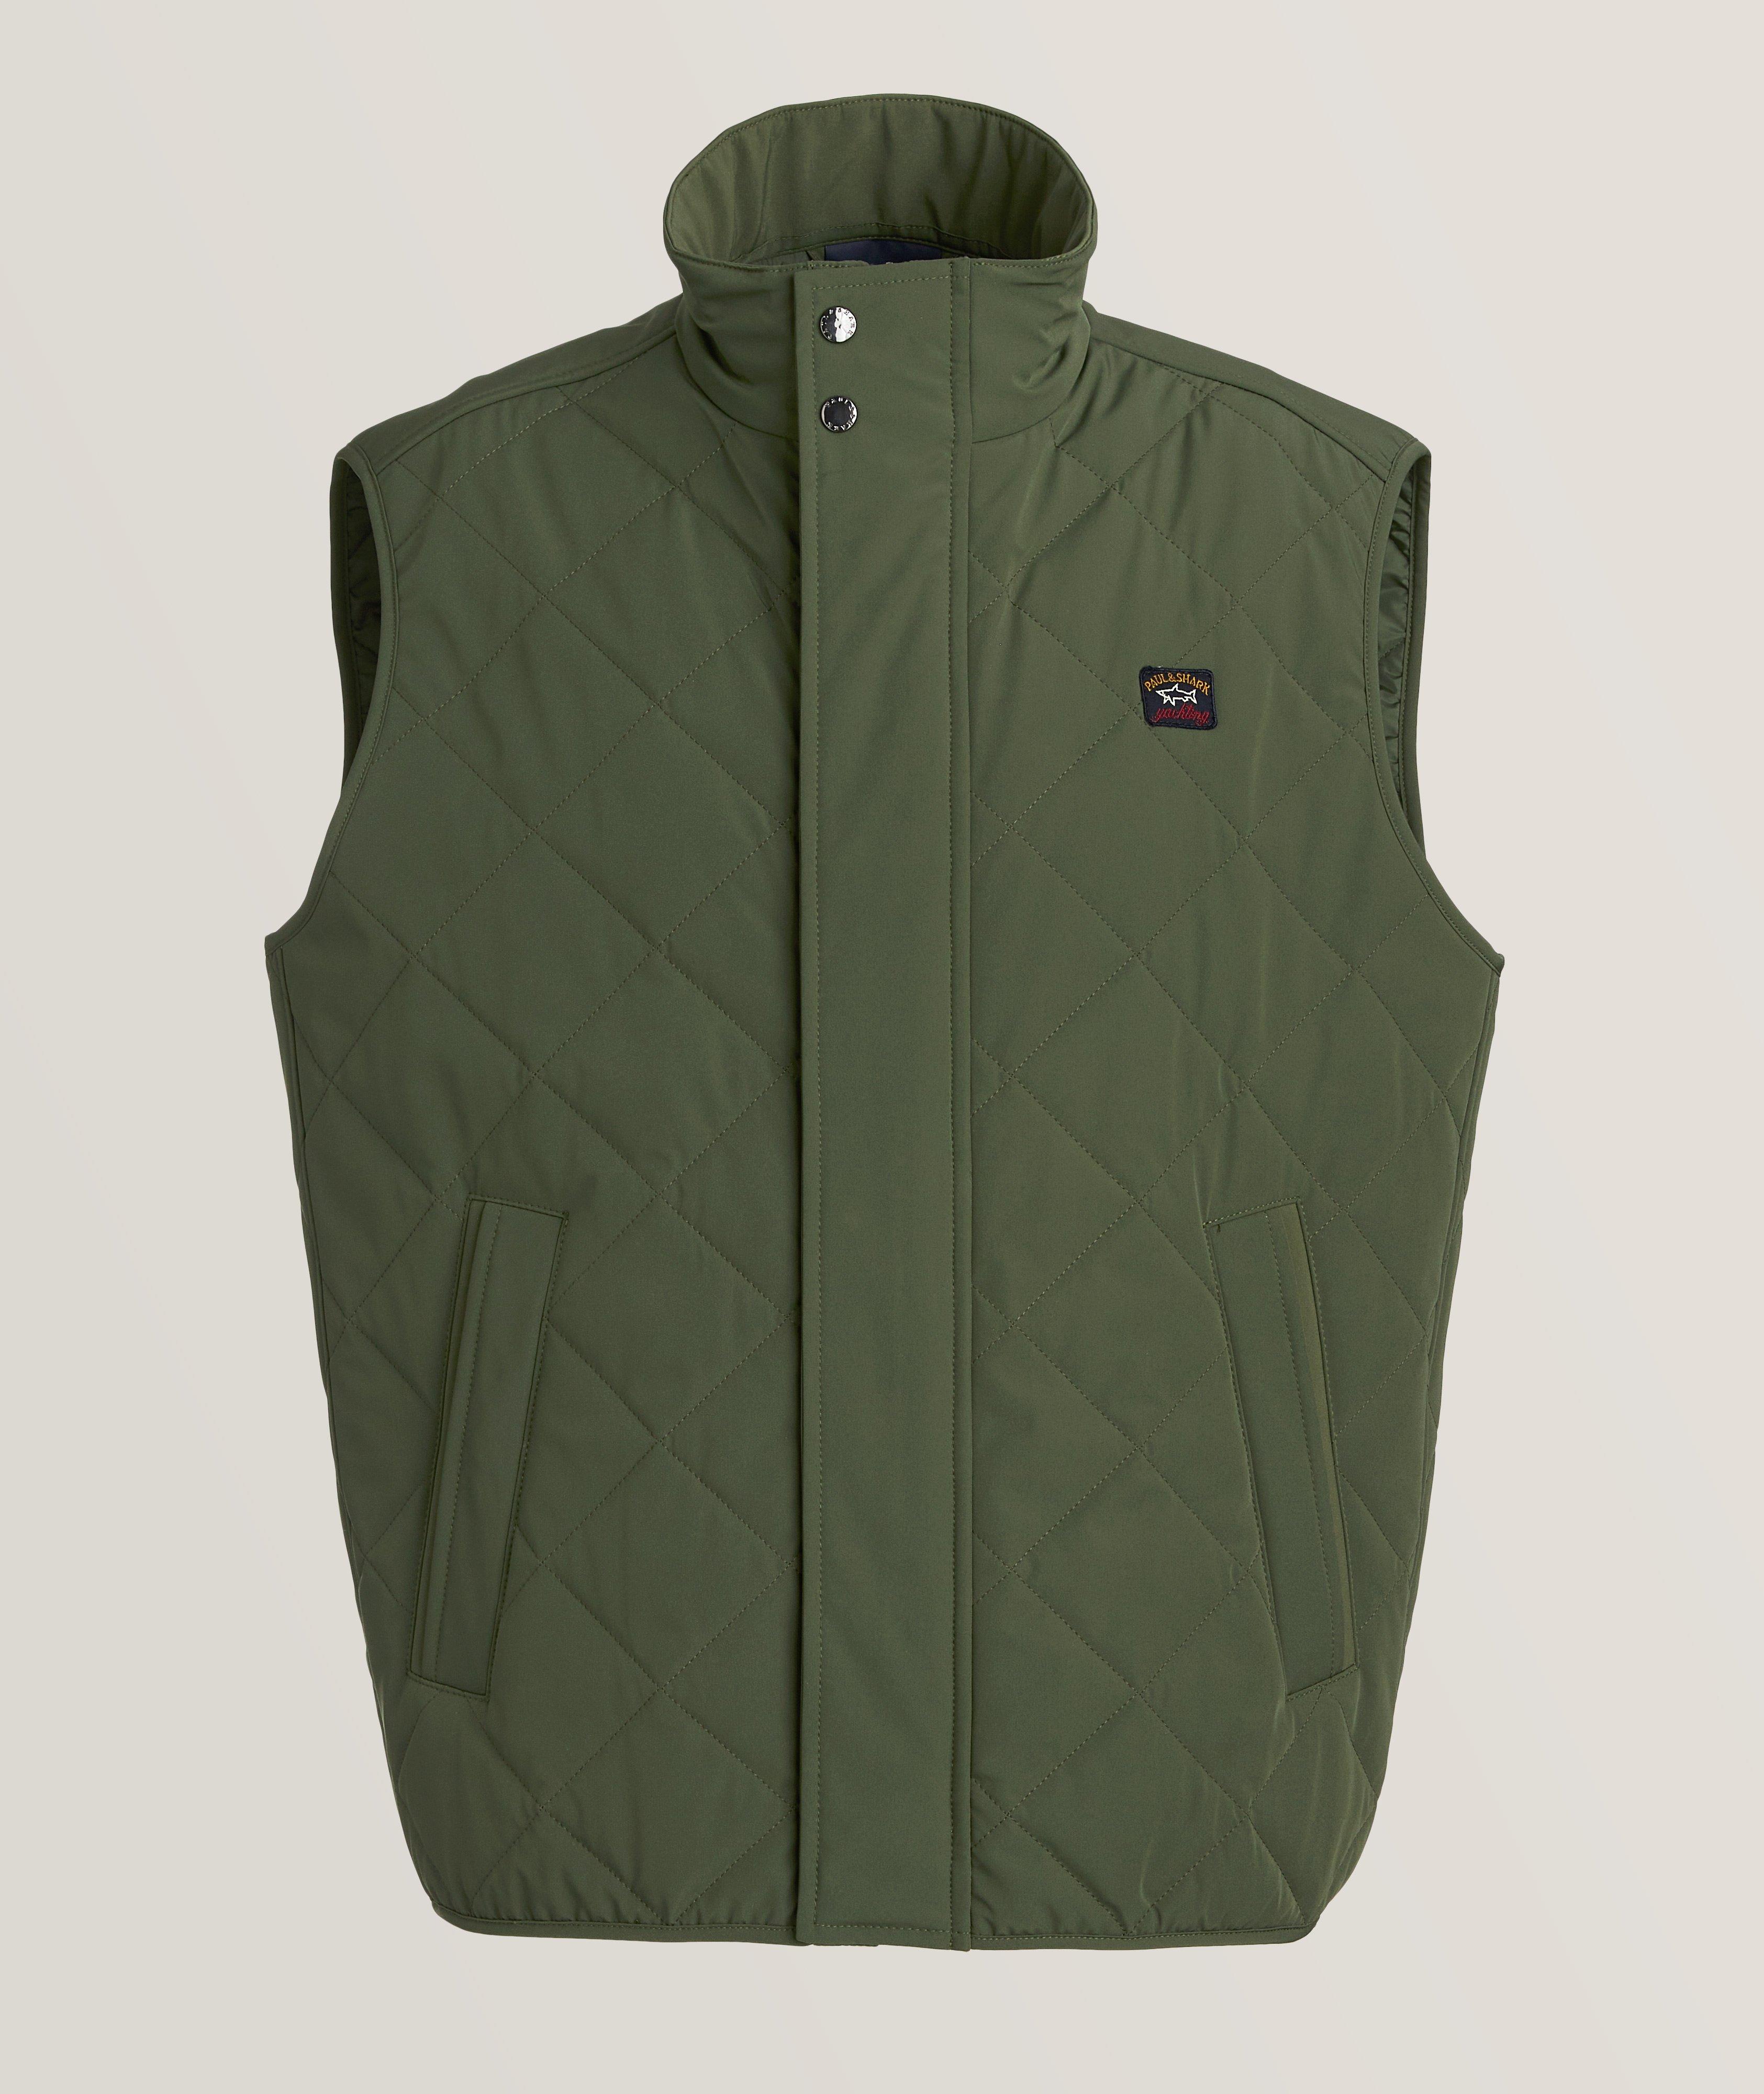 RE-4X4 STRETCH Quilted Technical Vest image 0